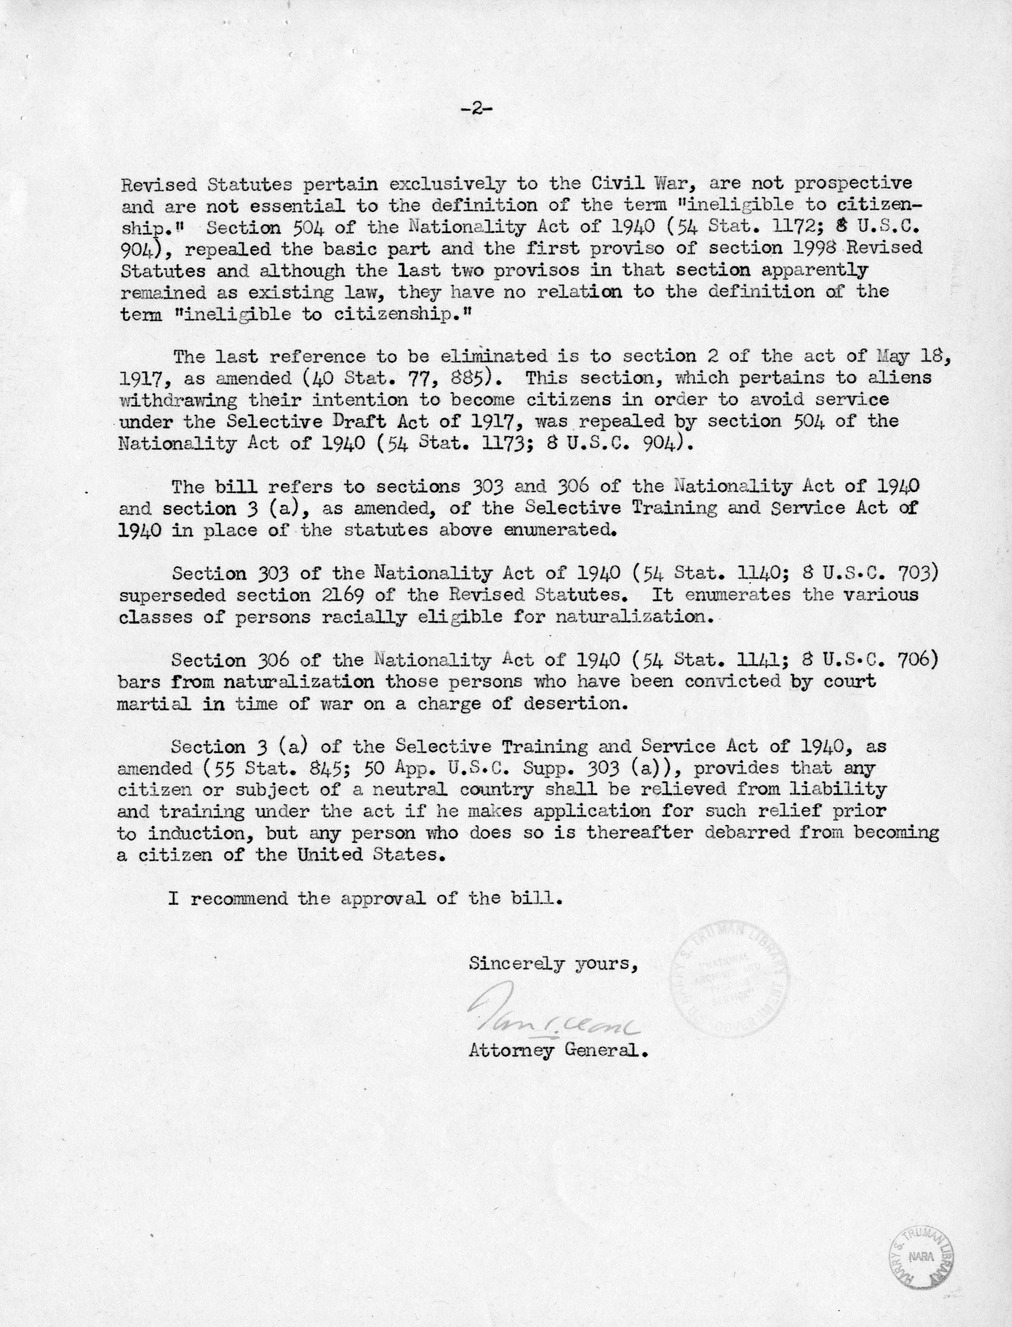 Memorandum from Frederick J. Bailey to M. C. Latta, H.R. 390, To Amend Section 28 (C) of the Immigration Act of 1924, with Attachments